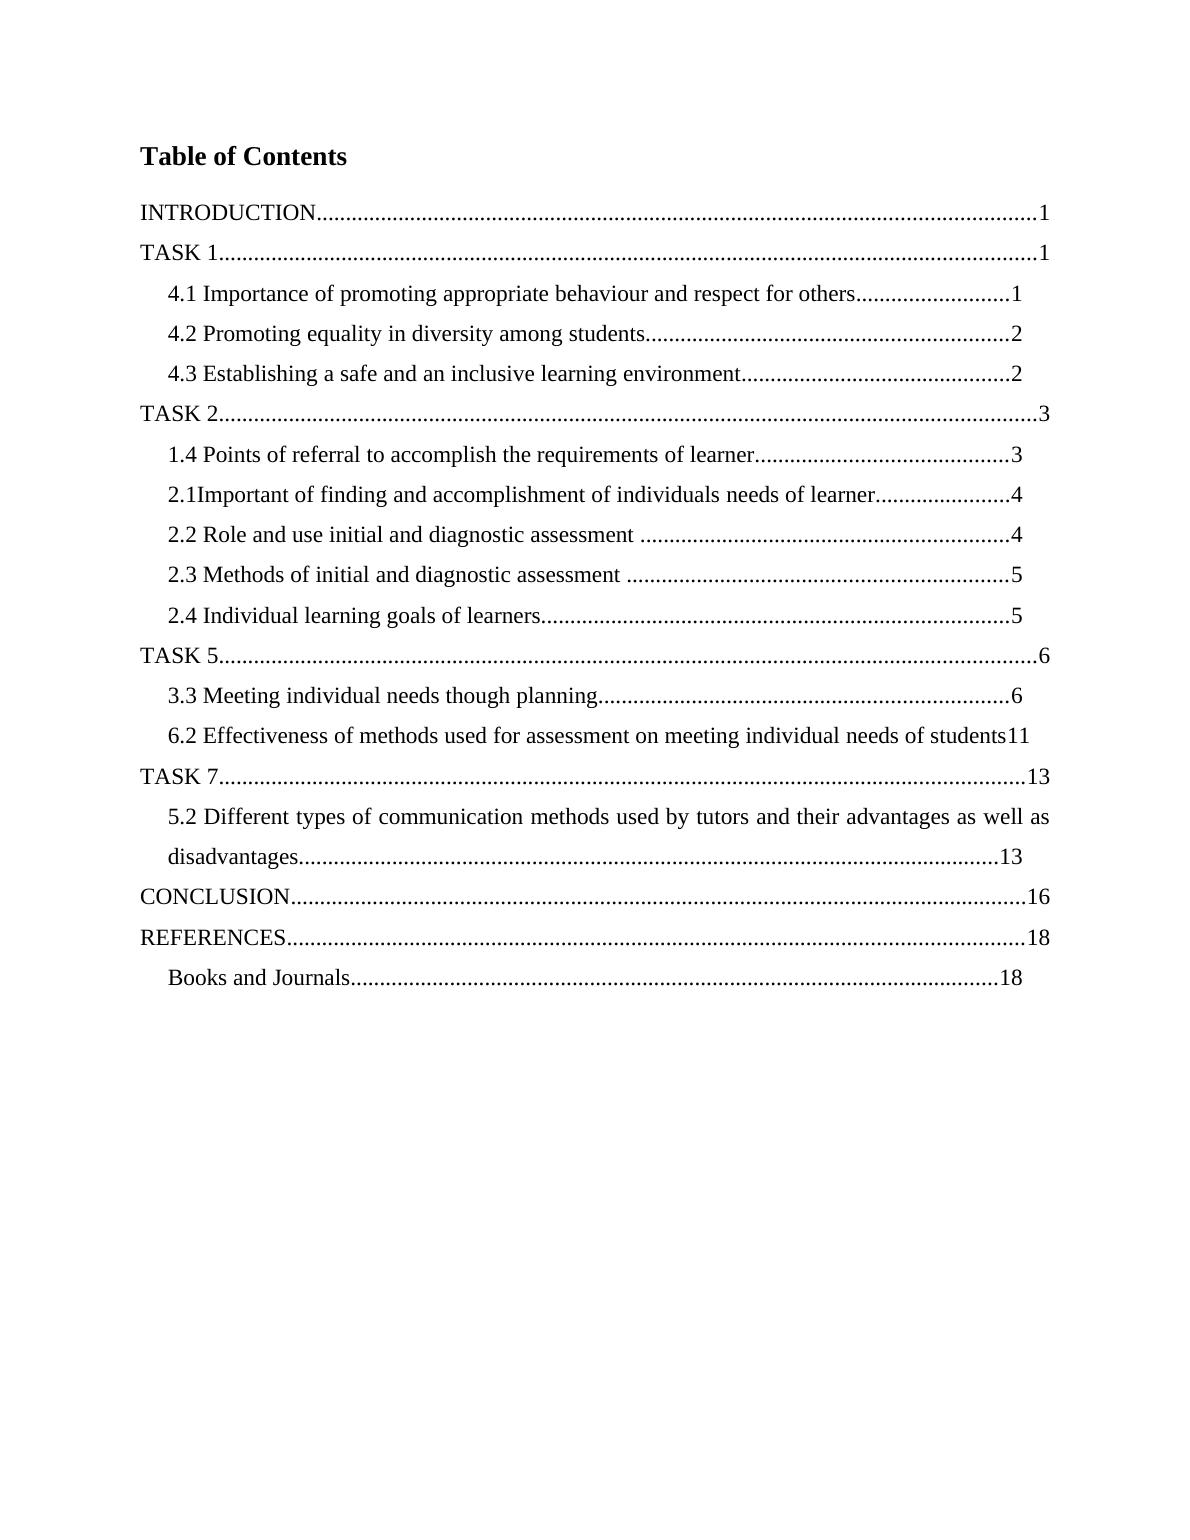 Teaching , learning and Assessment Report_2